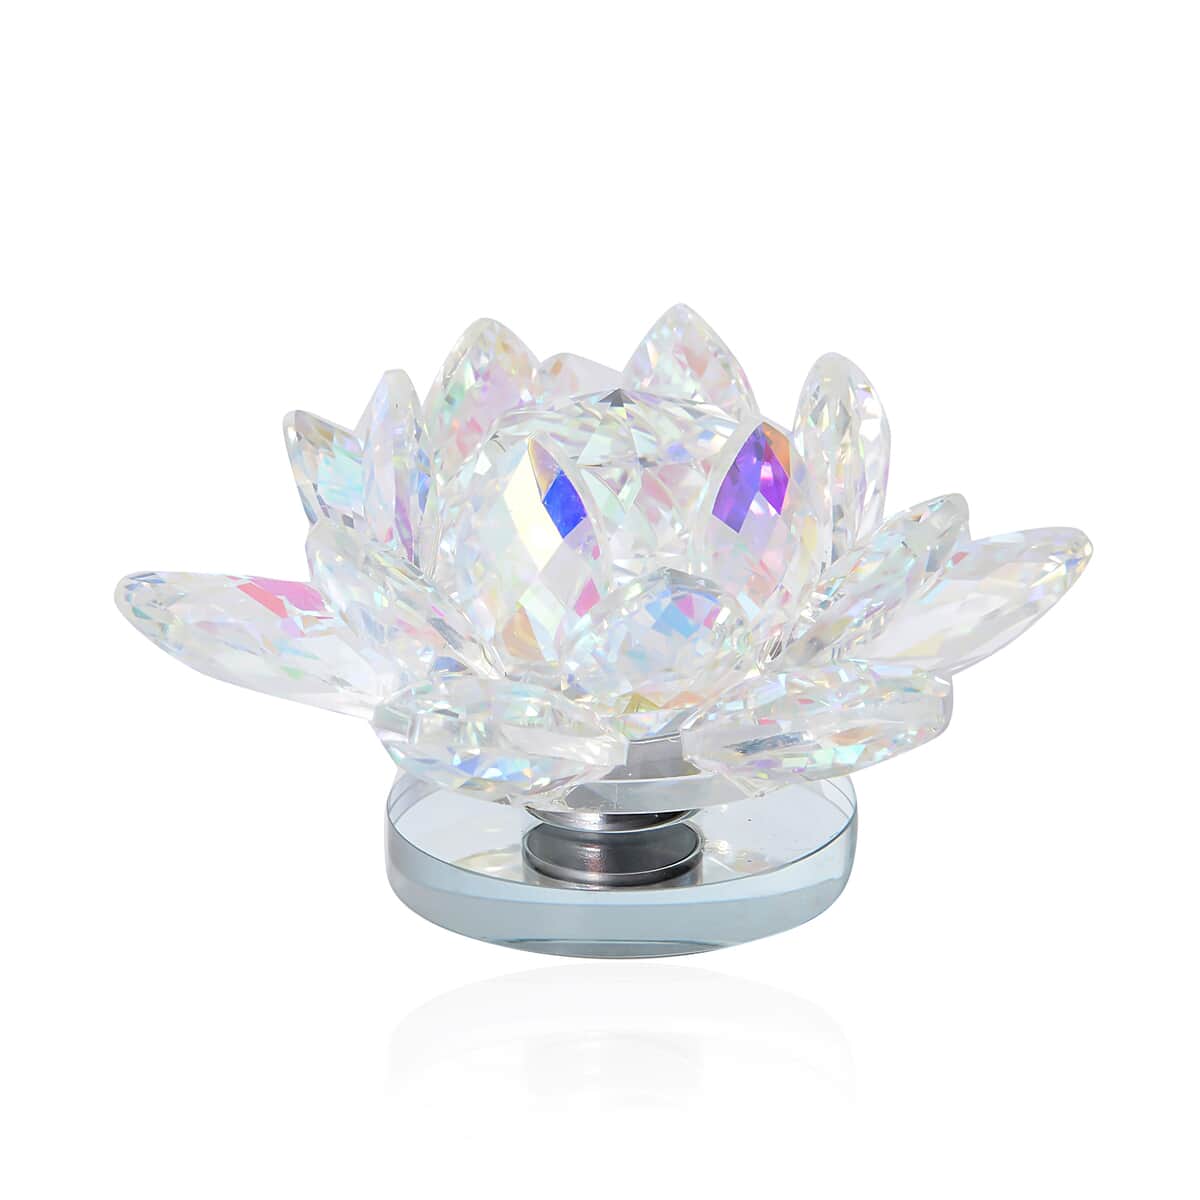 Aurora Borealis Crystal Lotus Flower with Rotating Base and Gift Box | Flower Crystals | Decorative Crystal Room Decor | Crystal Decorations image number 0